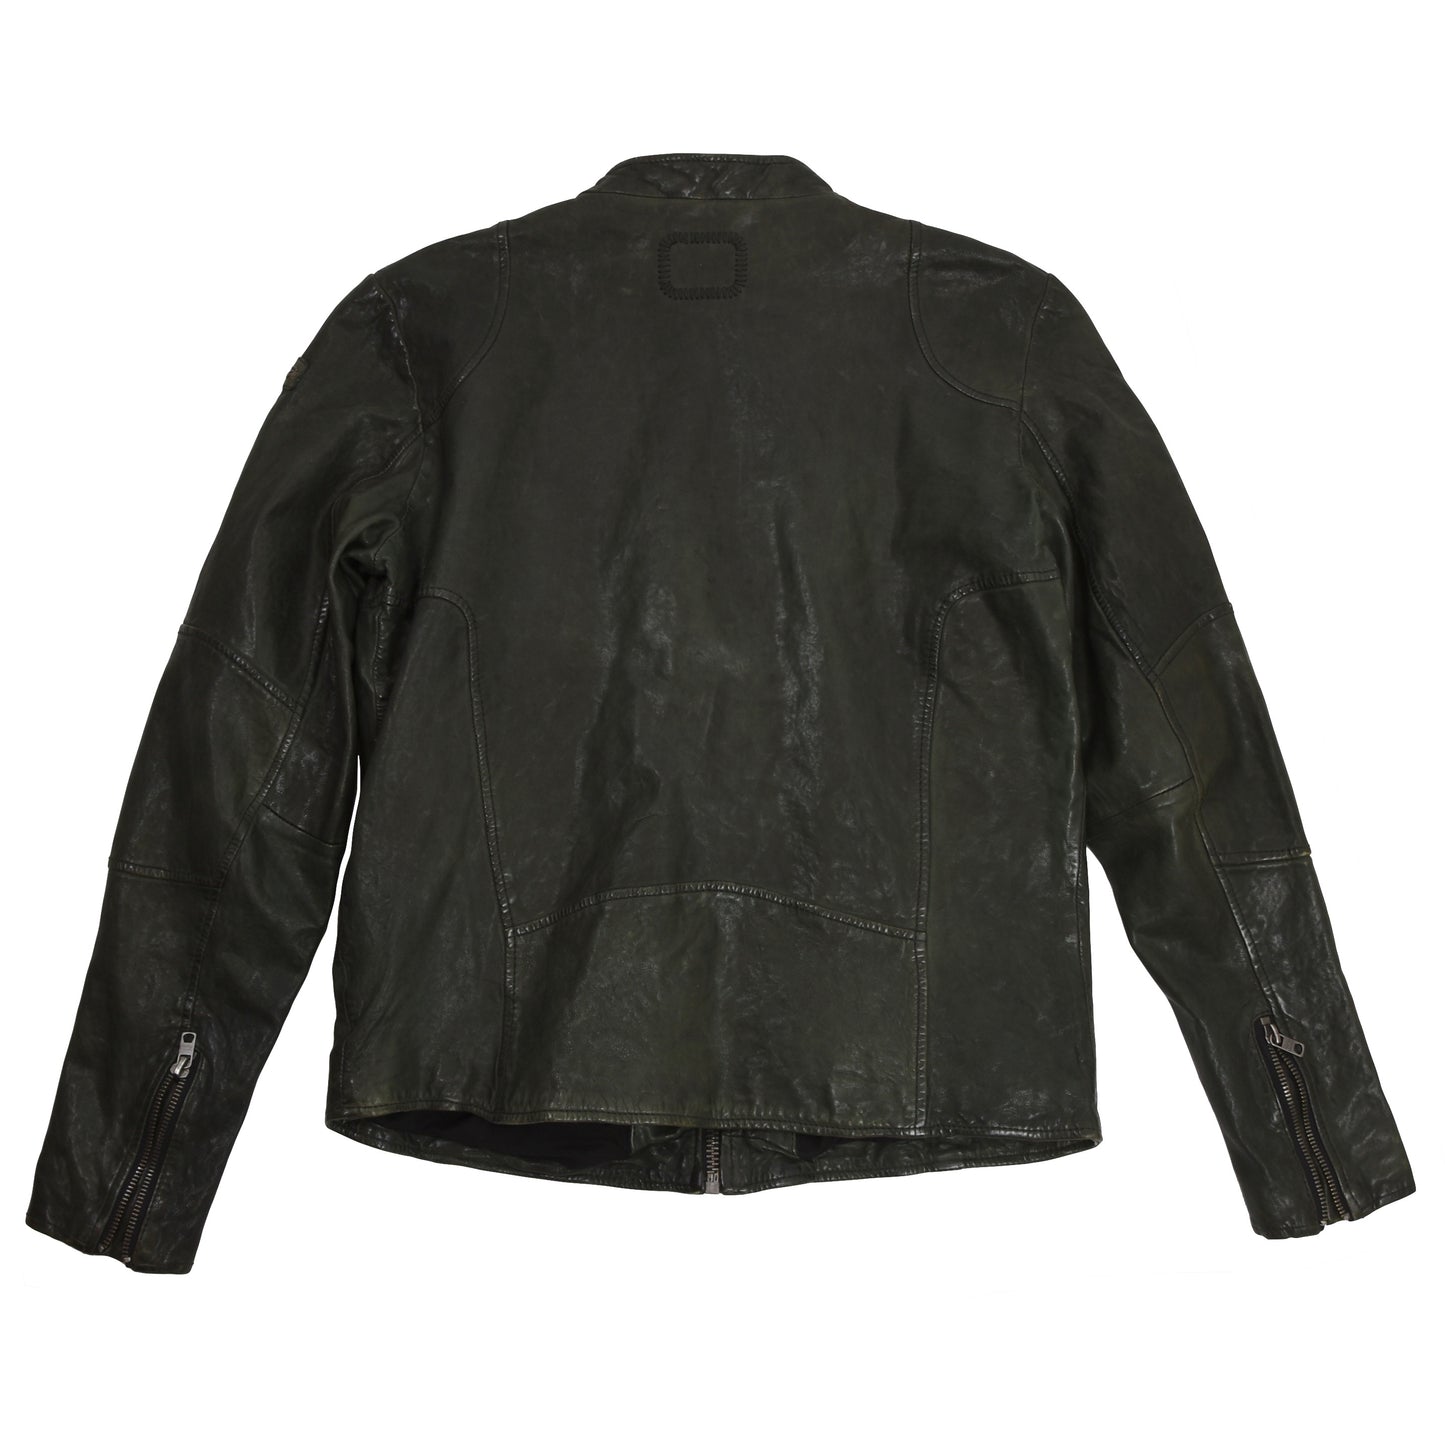 Tigha Sheep Leather Cafe Racer Jacket - Green